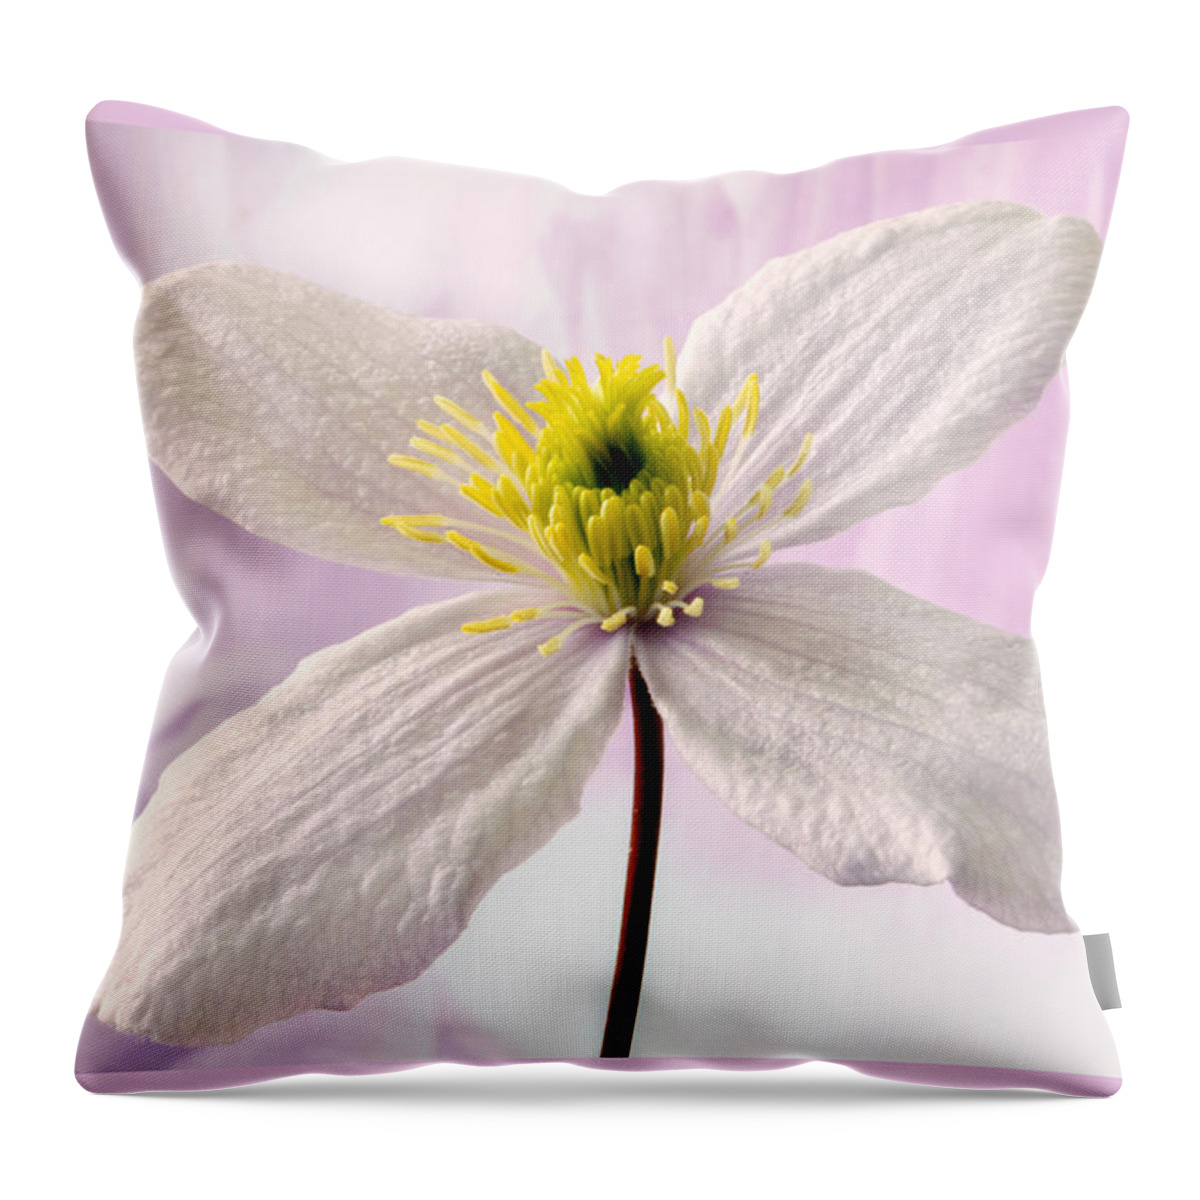 Clematis Throw Pillow featuring the photograph Clematis by Terence Davis